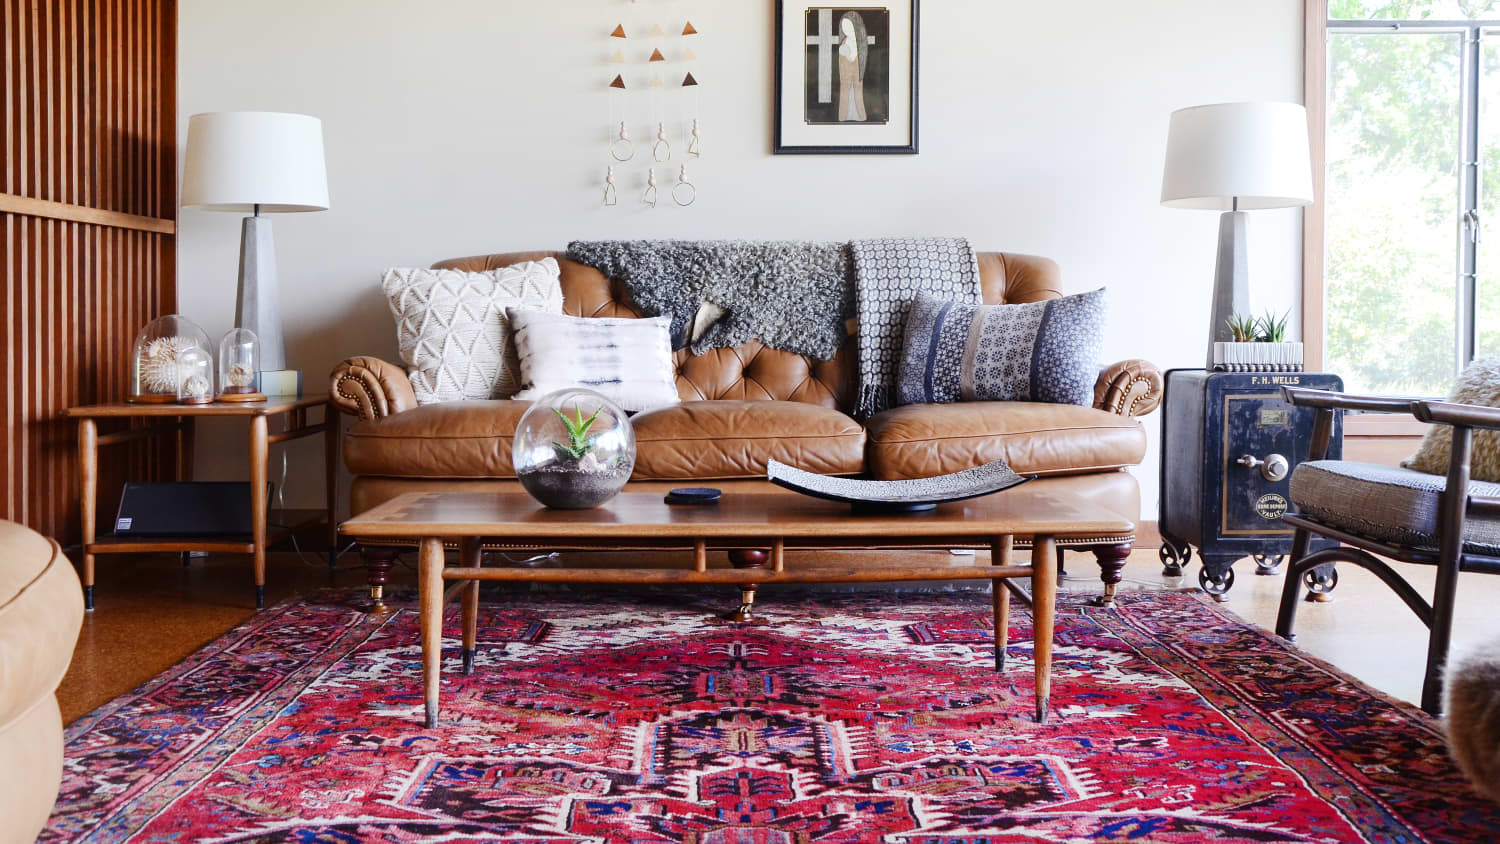 10 Easy Ways to Make Your Home More Cozy This Winter